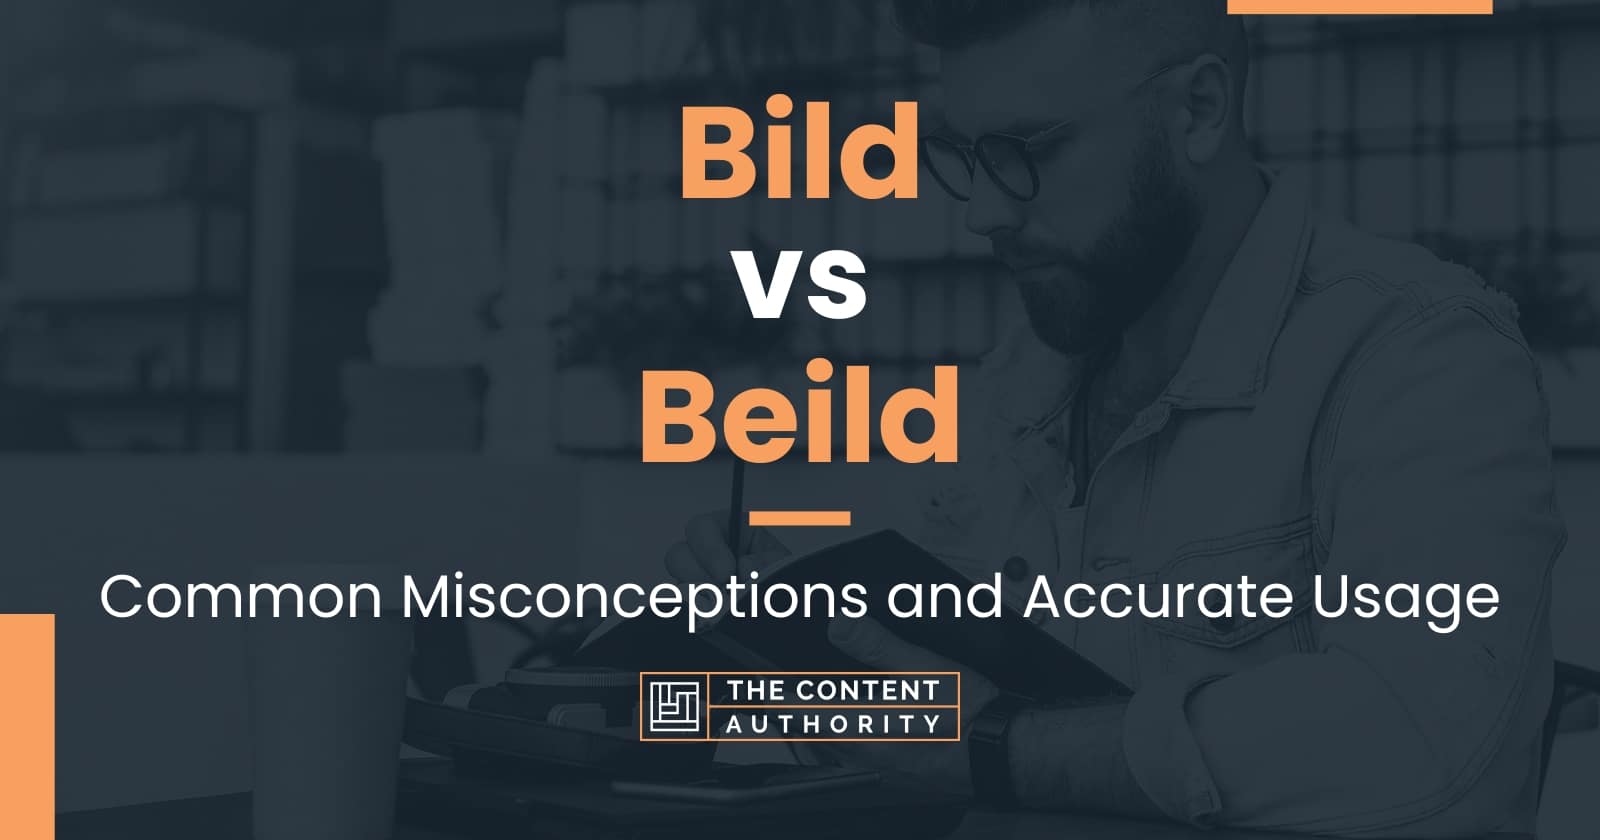 Bild vs Beild: Common Misconceptions and Accurate Usage